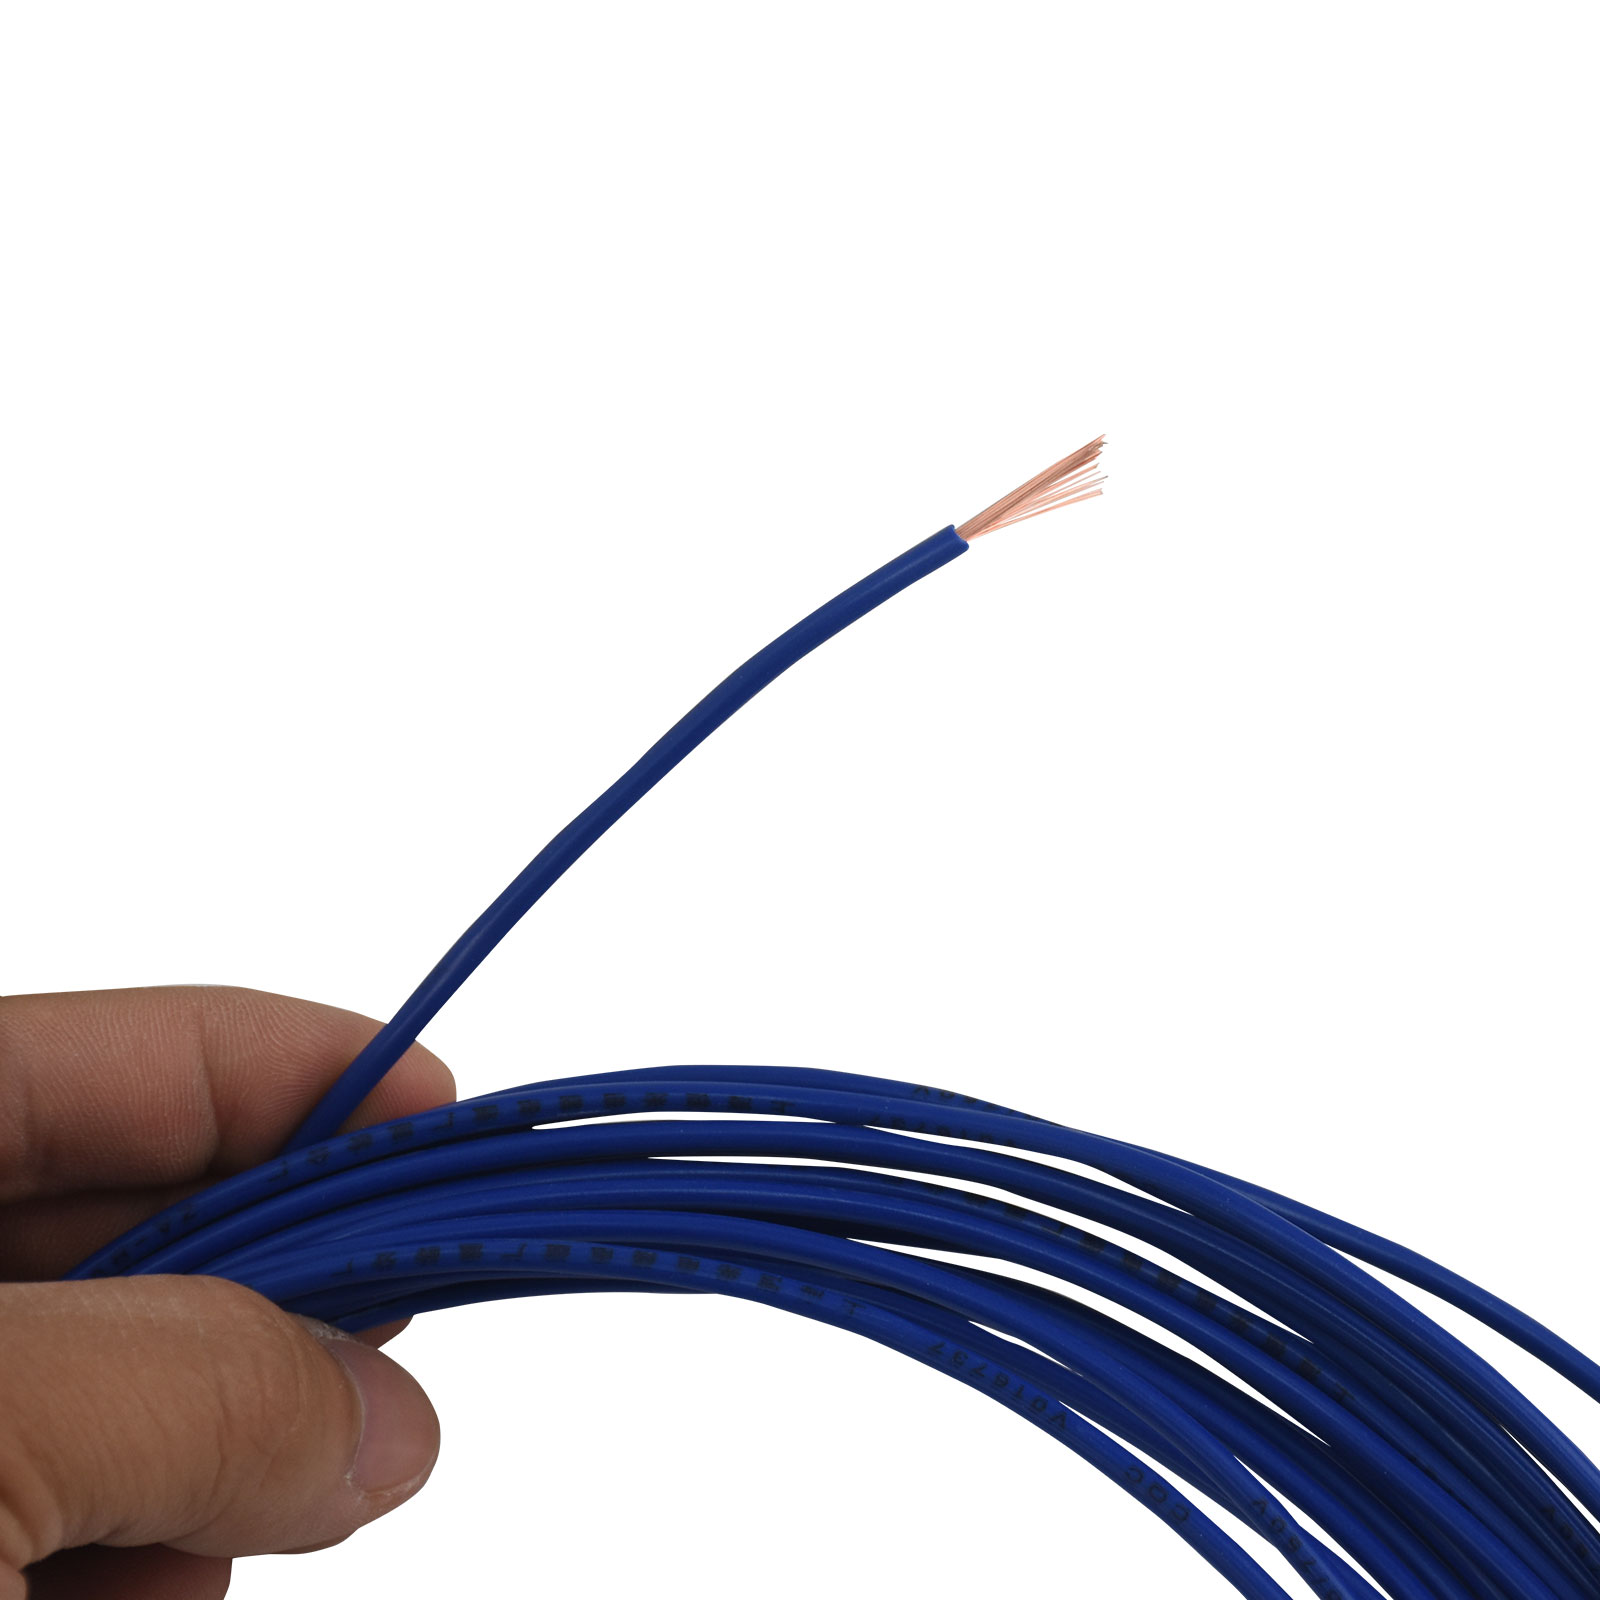 16AWG 1.5mm² PVC Insulated Copper Stranded Wire - Blue